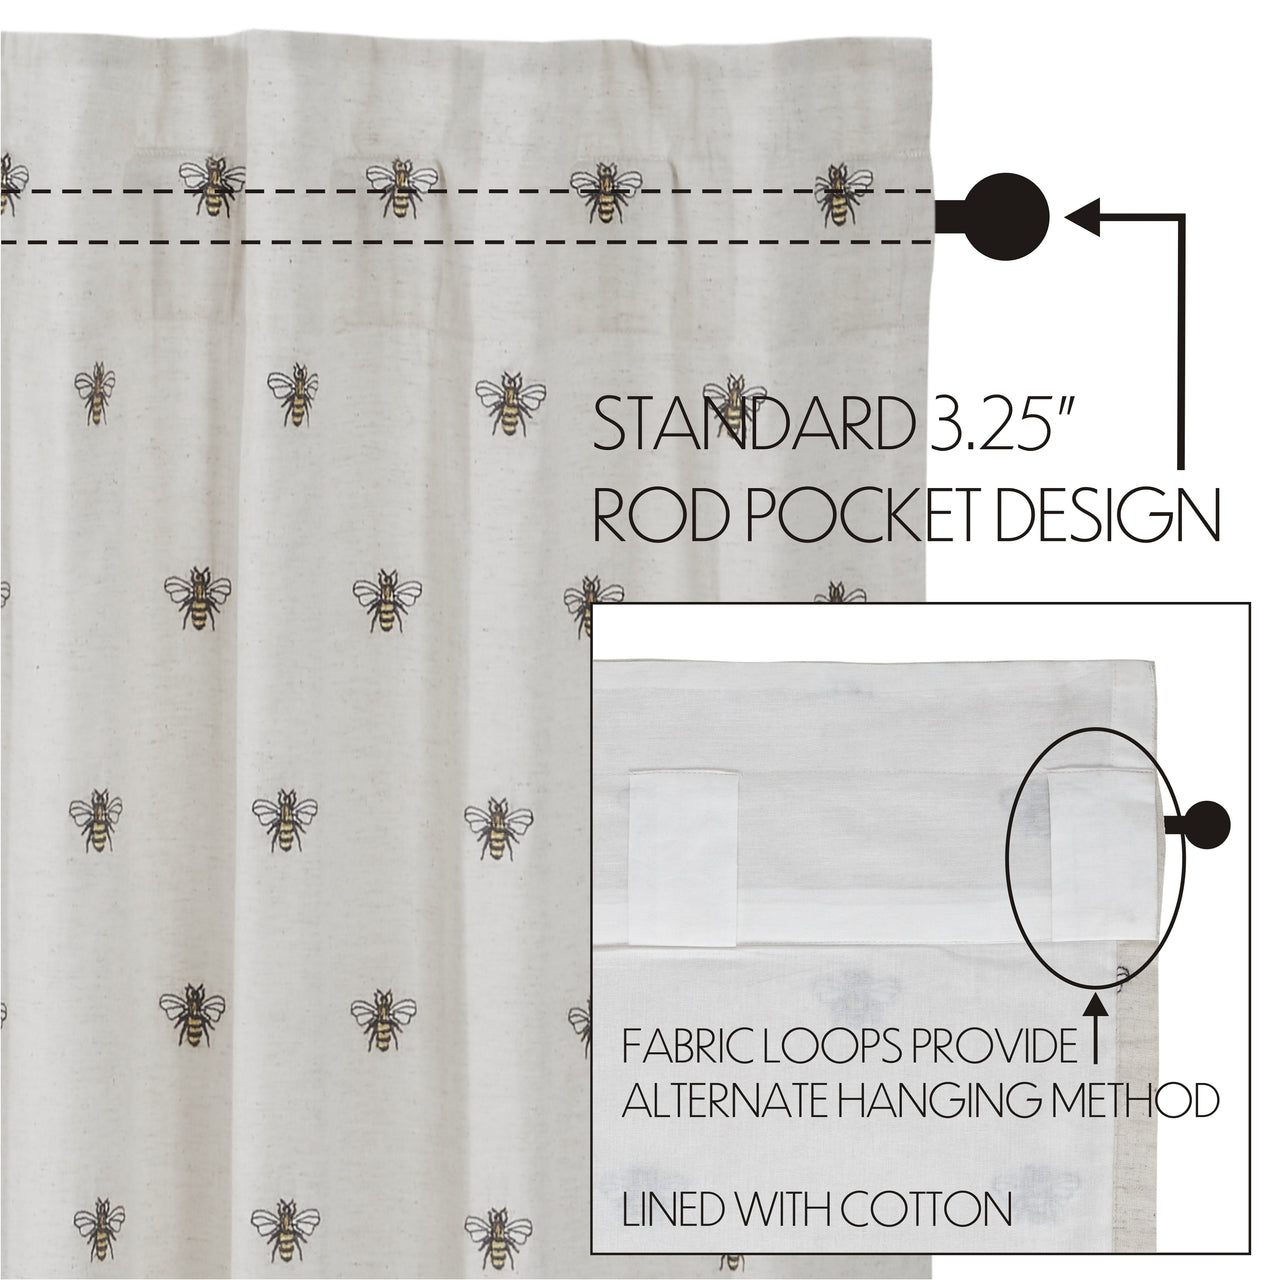 Embroidered Bee Tier Curtain Set of 2 L24xW36 VHC Brands